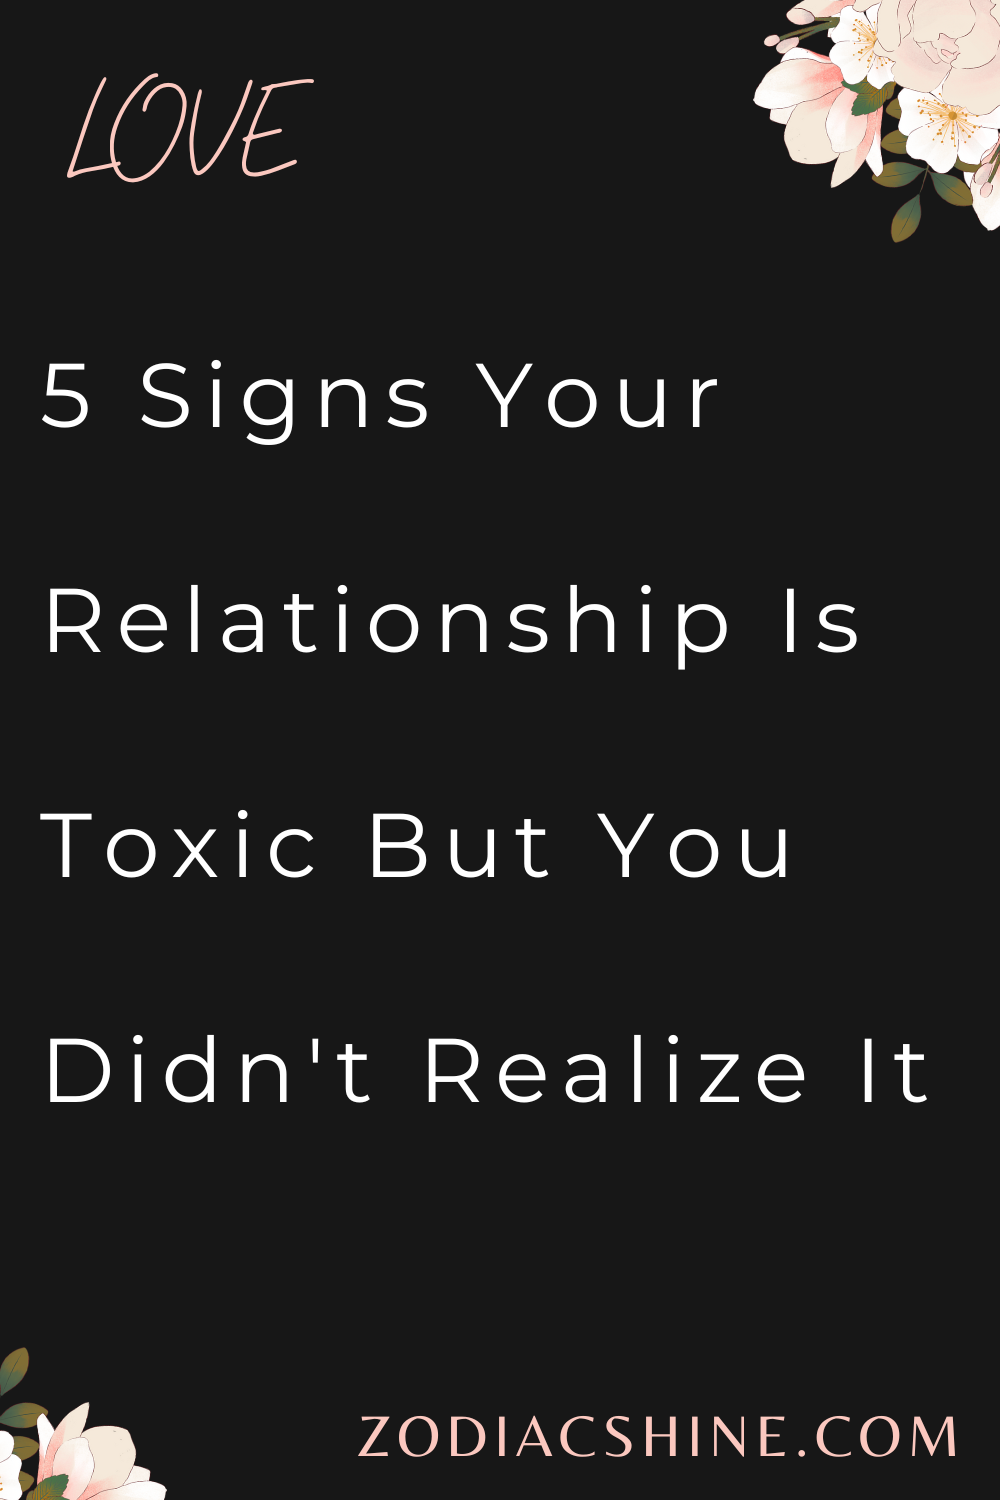 5 Signs Your Relationship Is Toxic But You Didn't Realize It